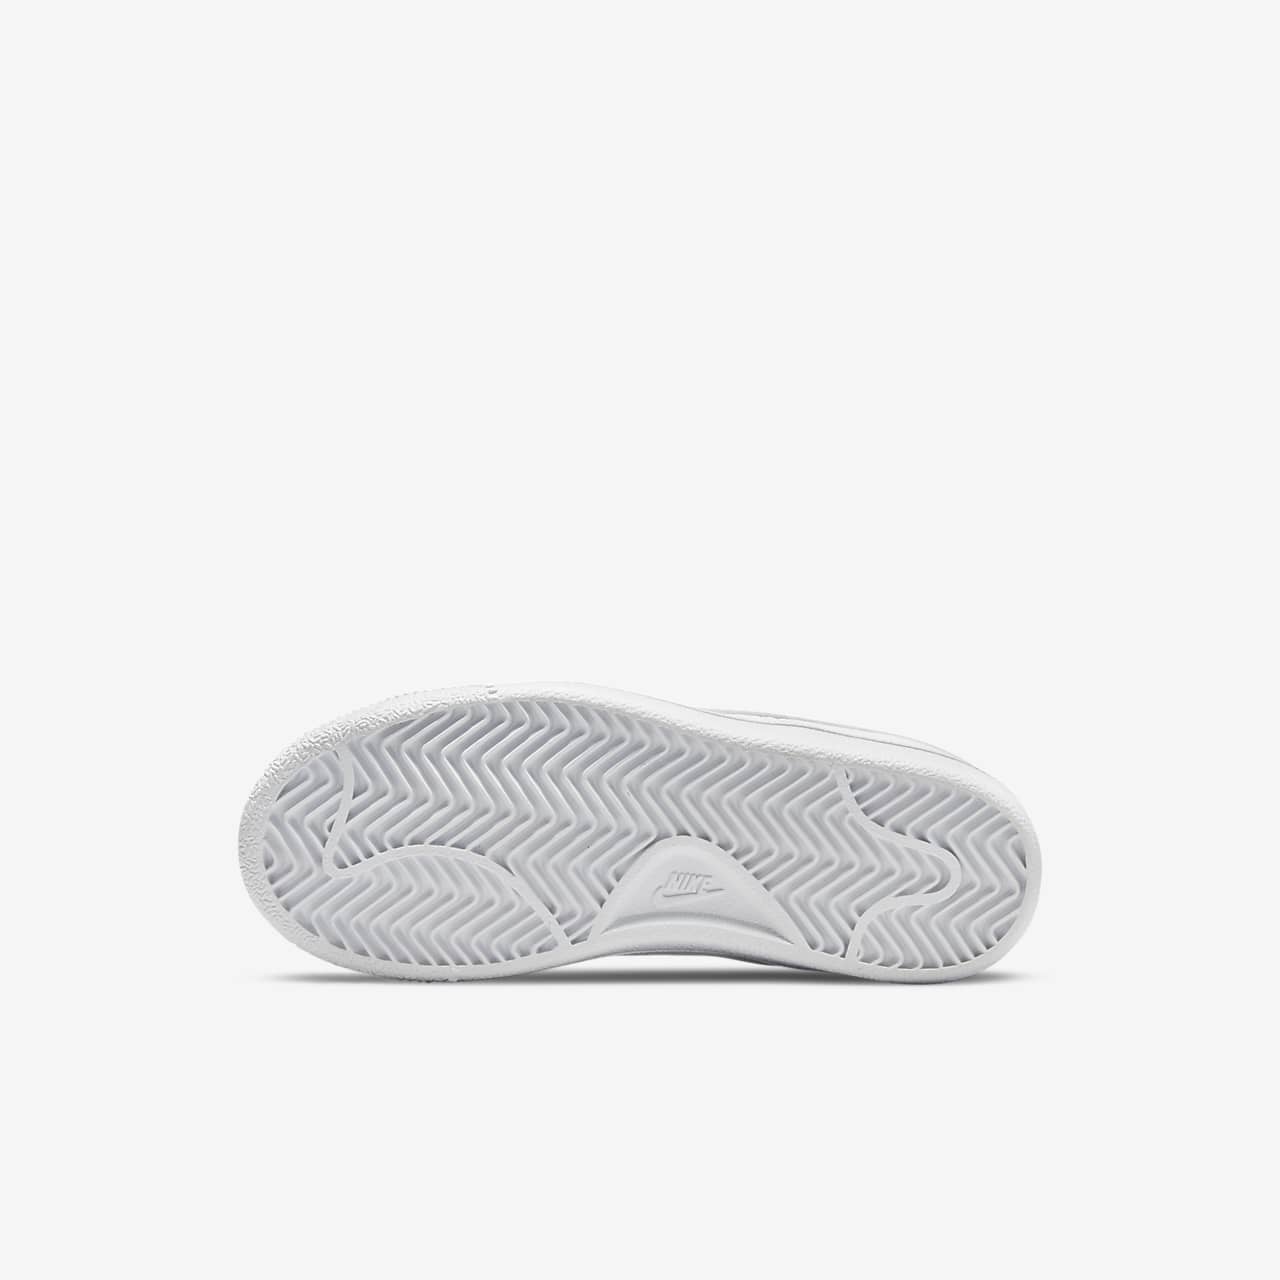 nike court royale grey sneakers